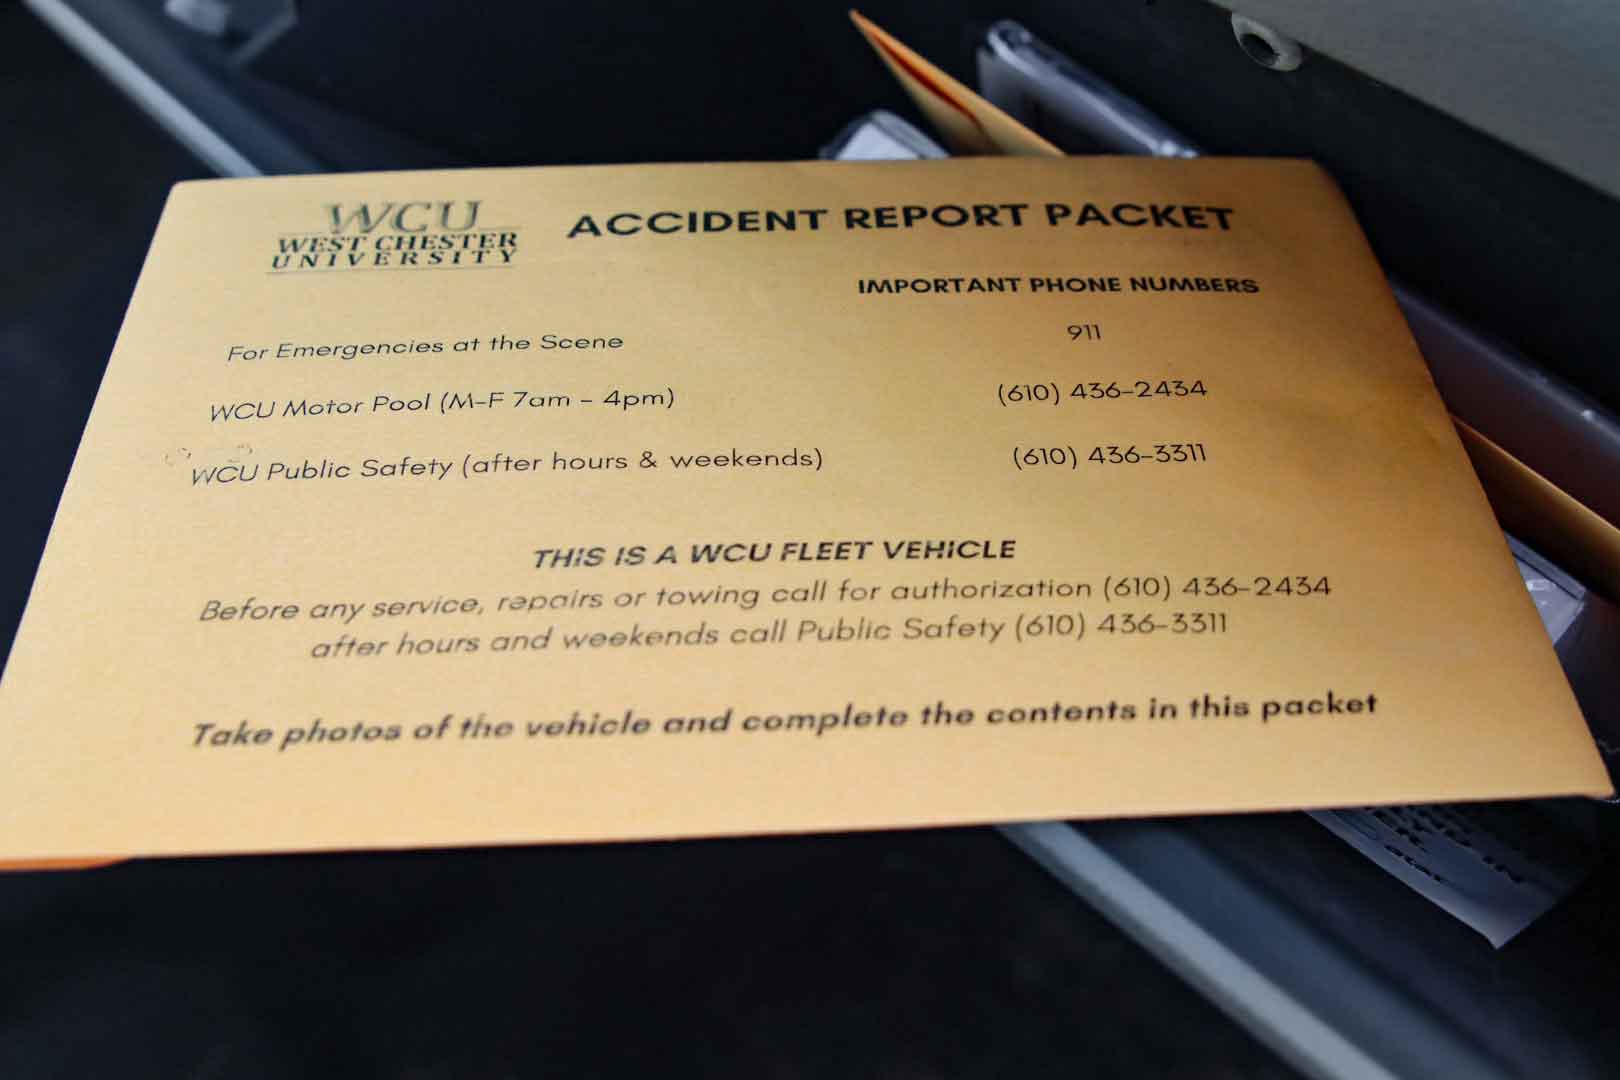 WCU West Chester University Accident Report Packet. Important Phone Numbers. For emergencies at the scene, 911. WCU Motor Pool (M-F 7AM-4PM) 610-436-2434. WCU Public Safety (after hours and weekends) 610-436-3311. This is a WCU fleet vehicle. Before any service, repairs or towing call for authorization 610-436-2434 after hours and weekends call Public Safety 610-436-3311. Take photos of the vehicle and complete the contents in this packet.